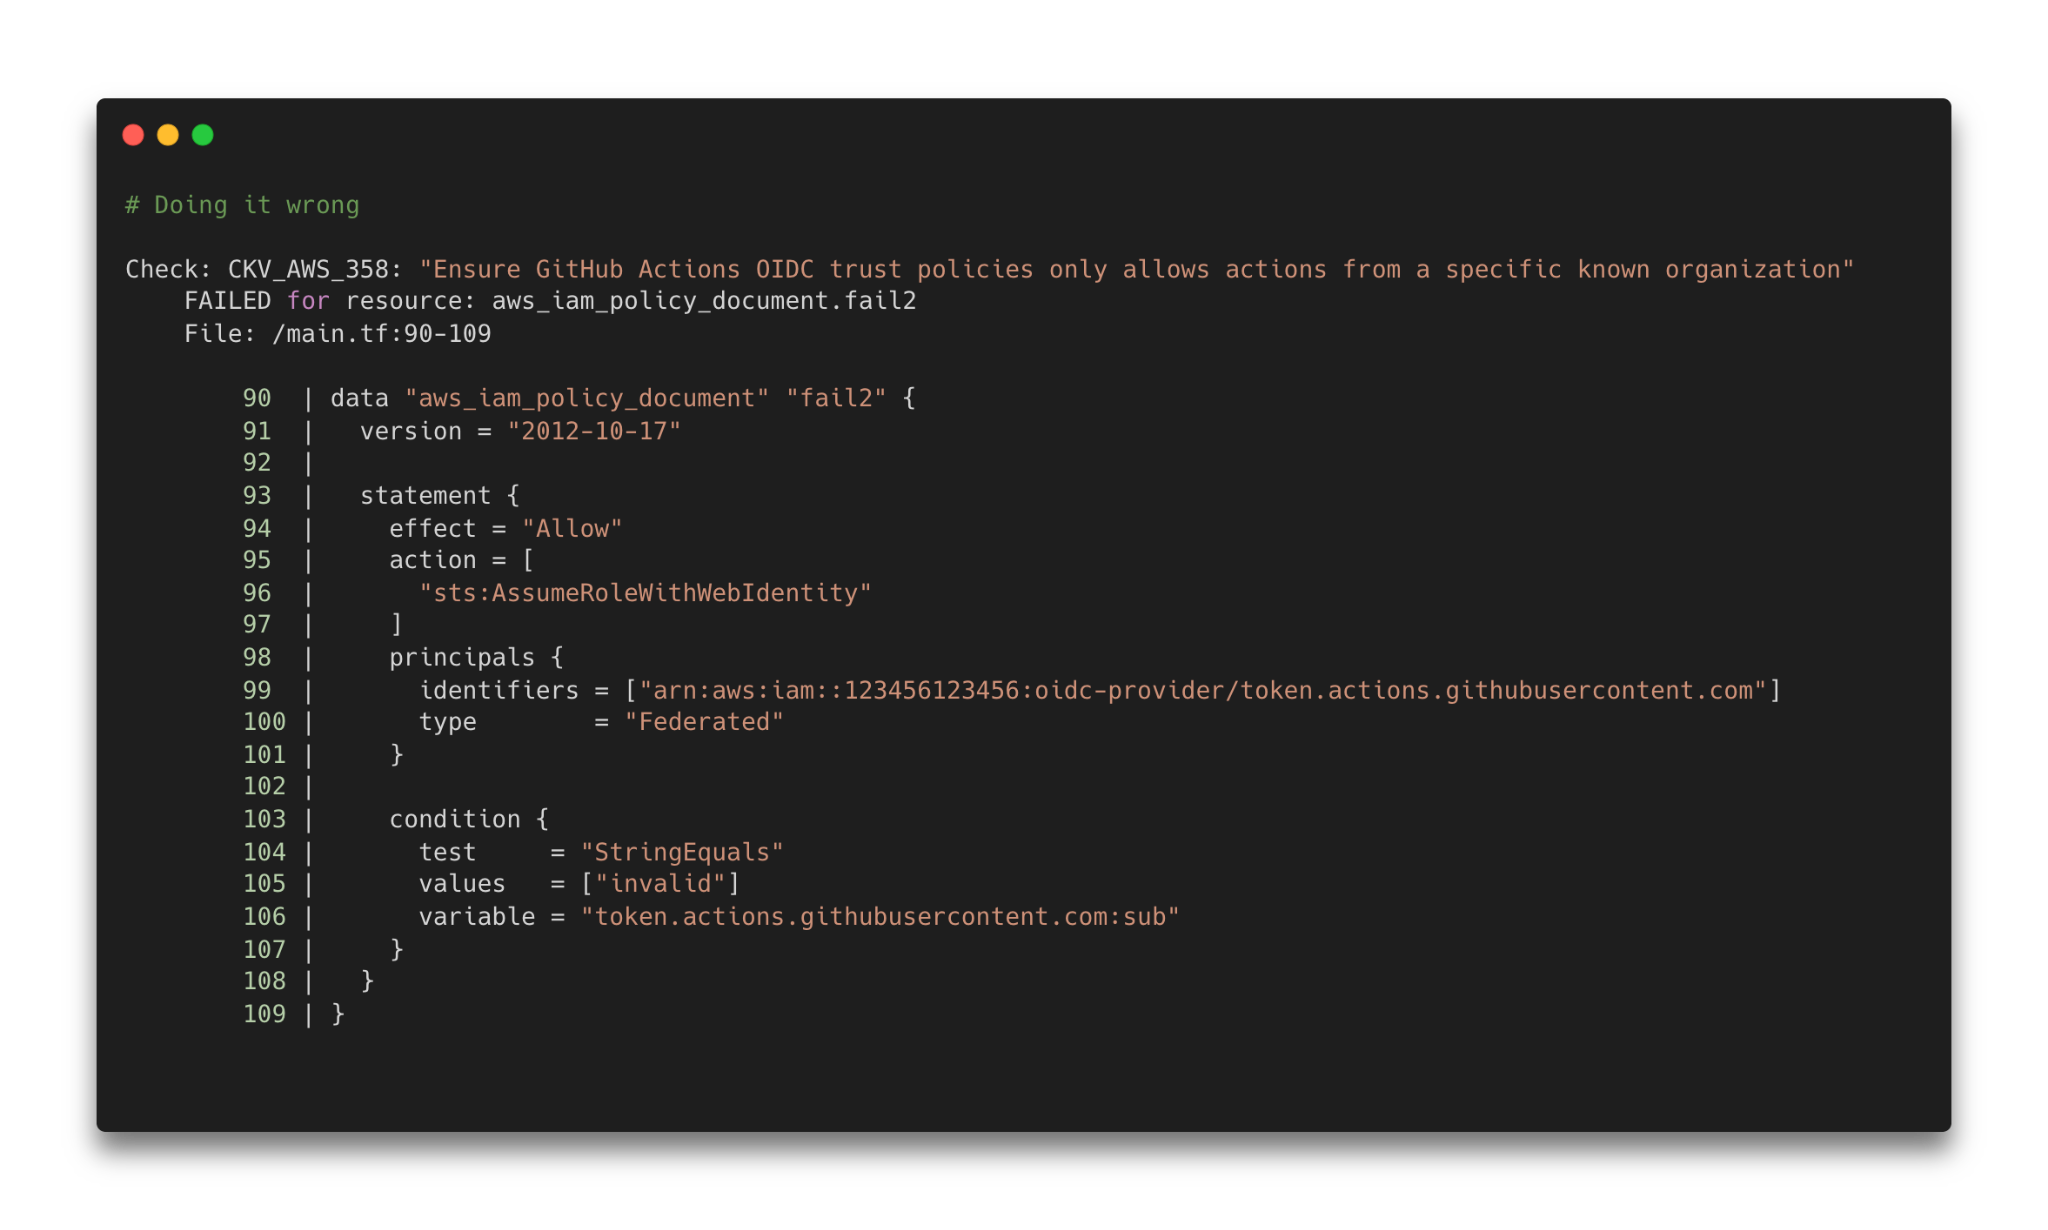 Checkov’s CLI output shows a failed scan, indicating a misconfiguration in your OIDC trust policies.